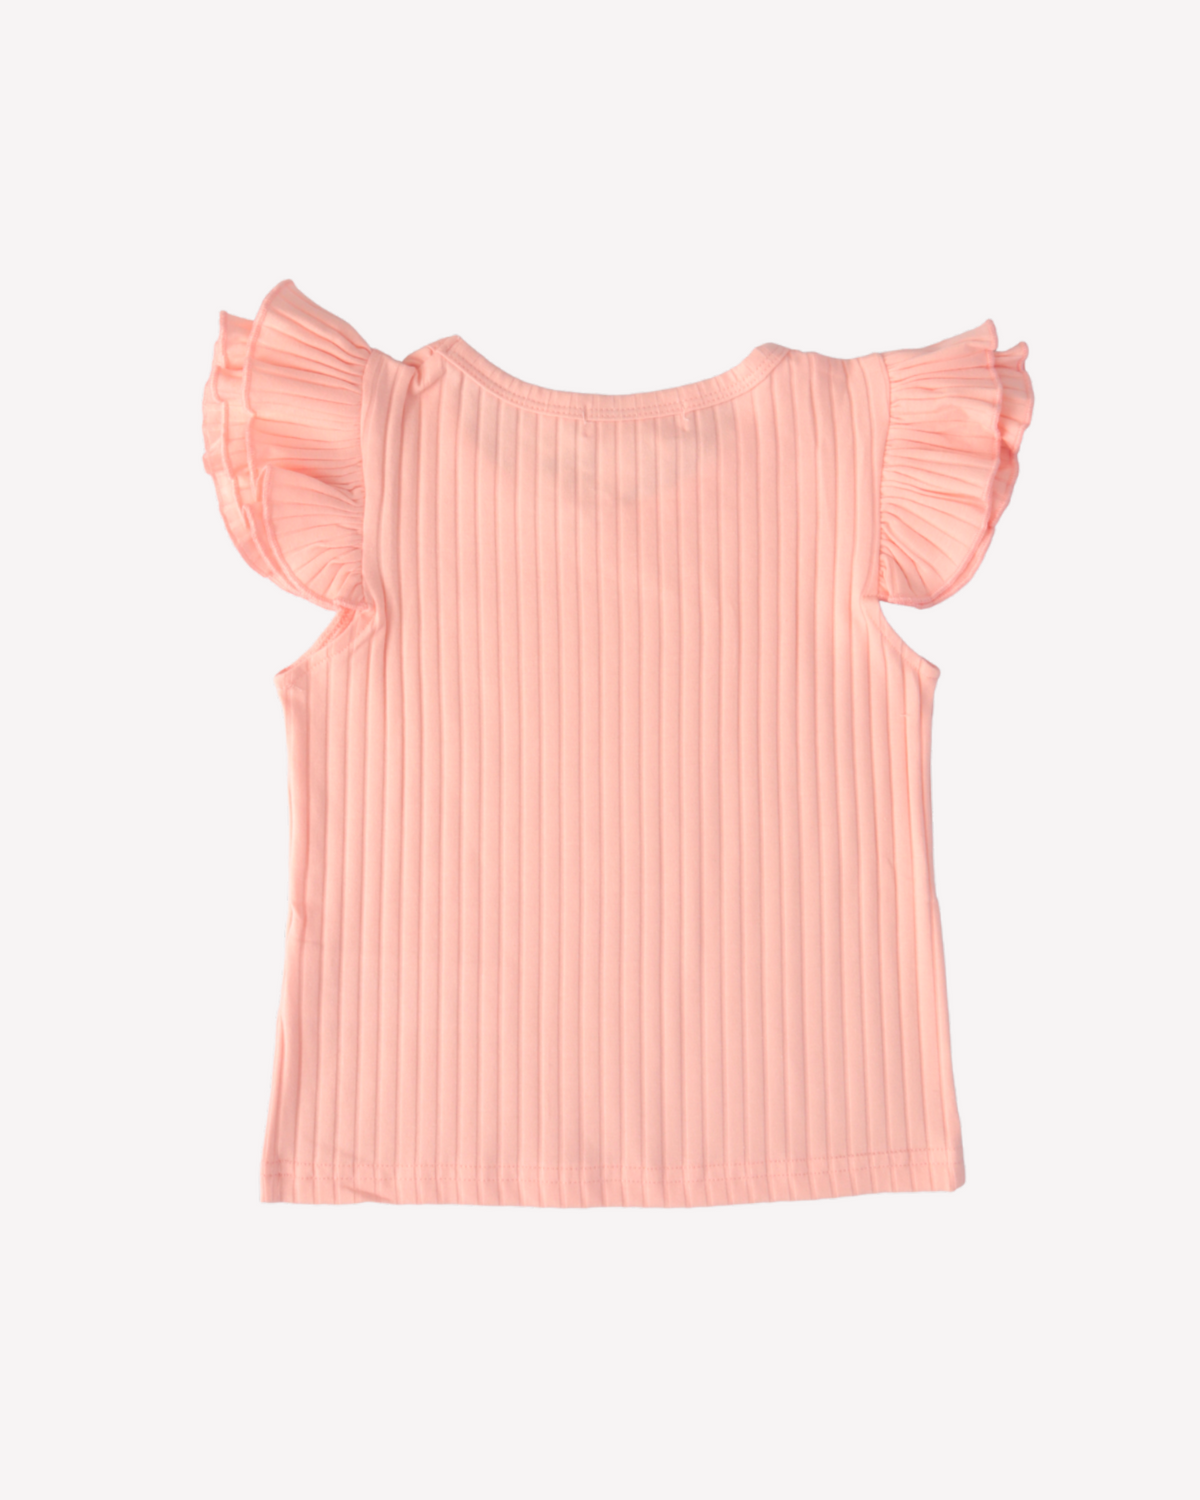 Ribbed Full Flutter Top in Peachy Pink